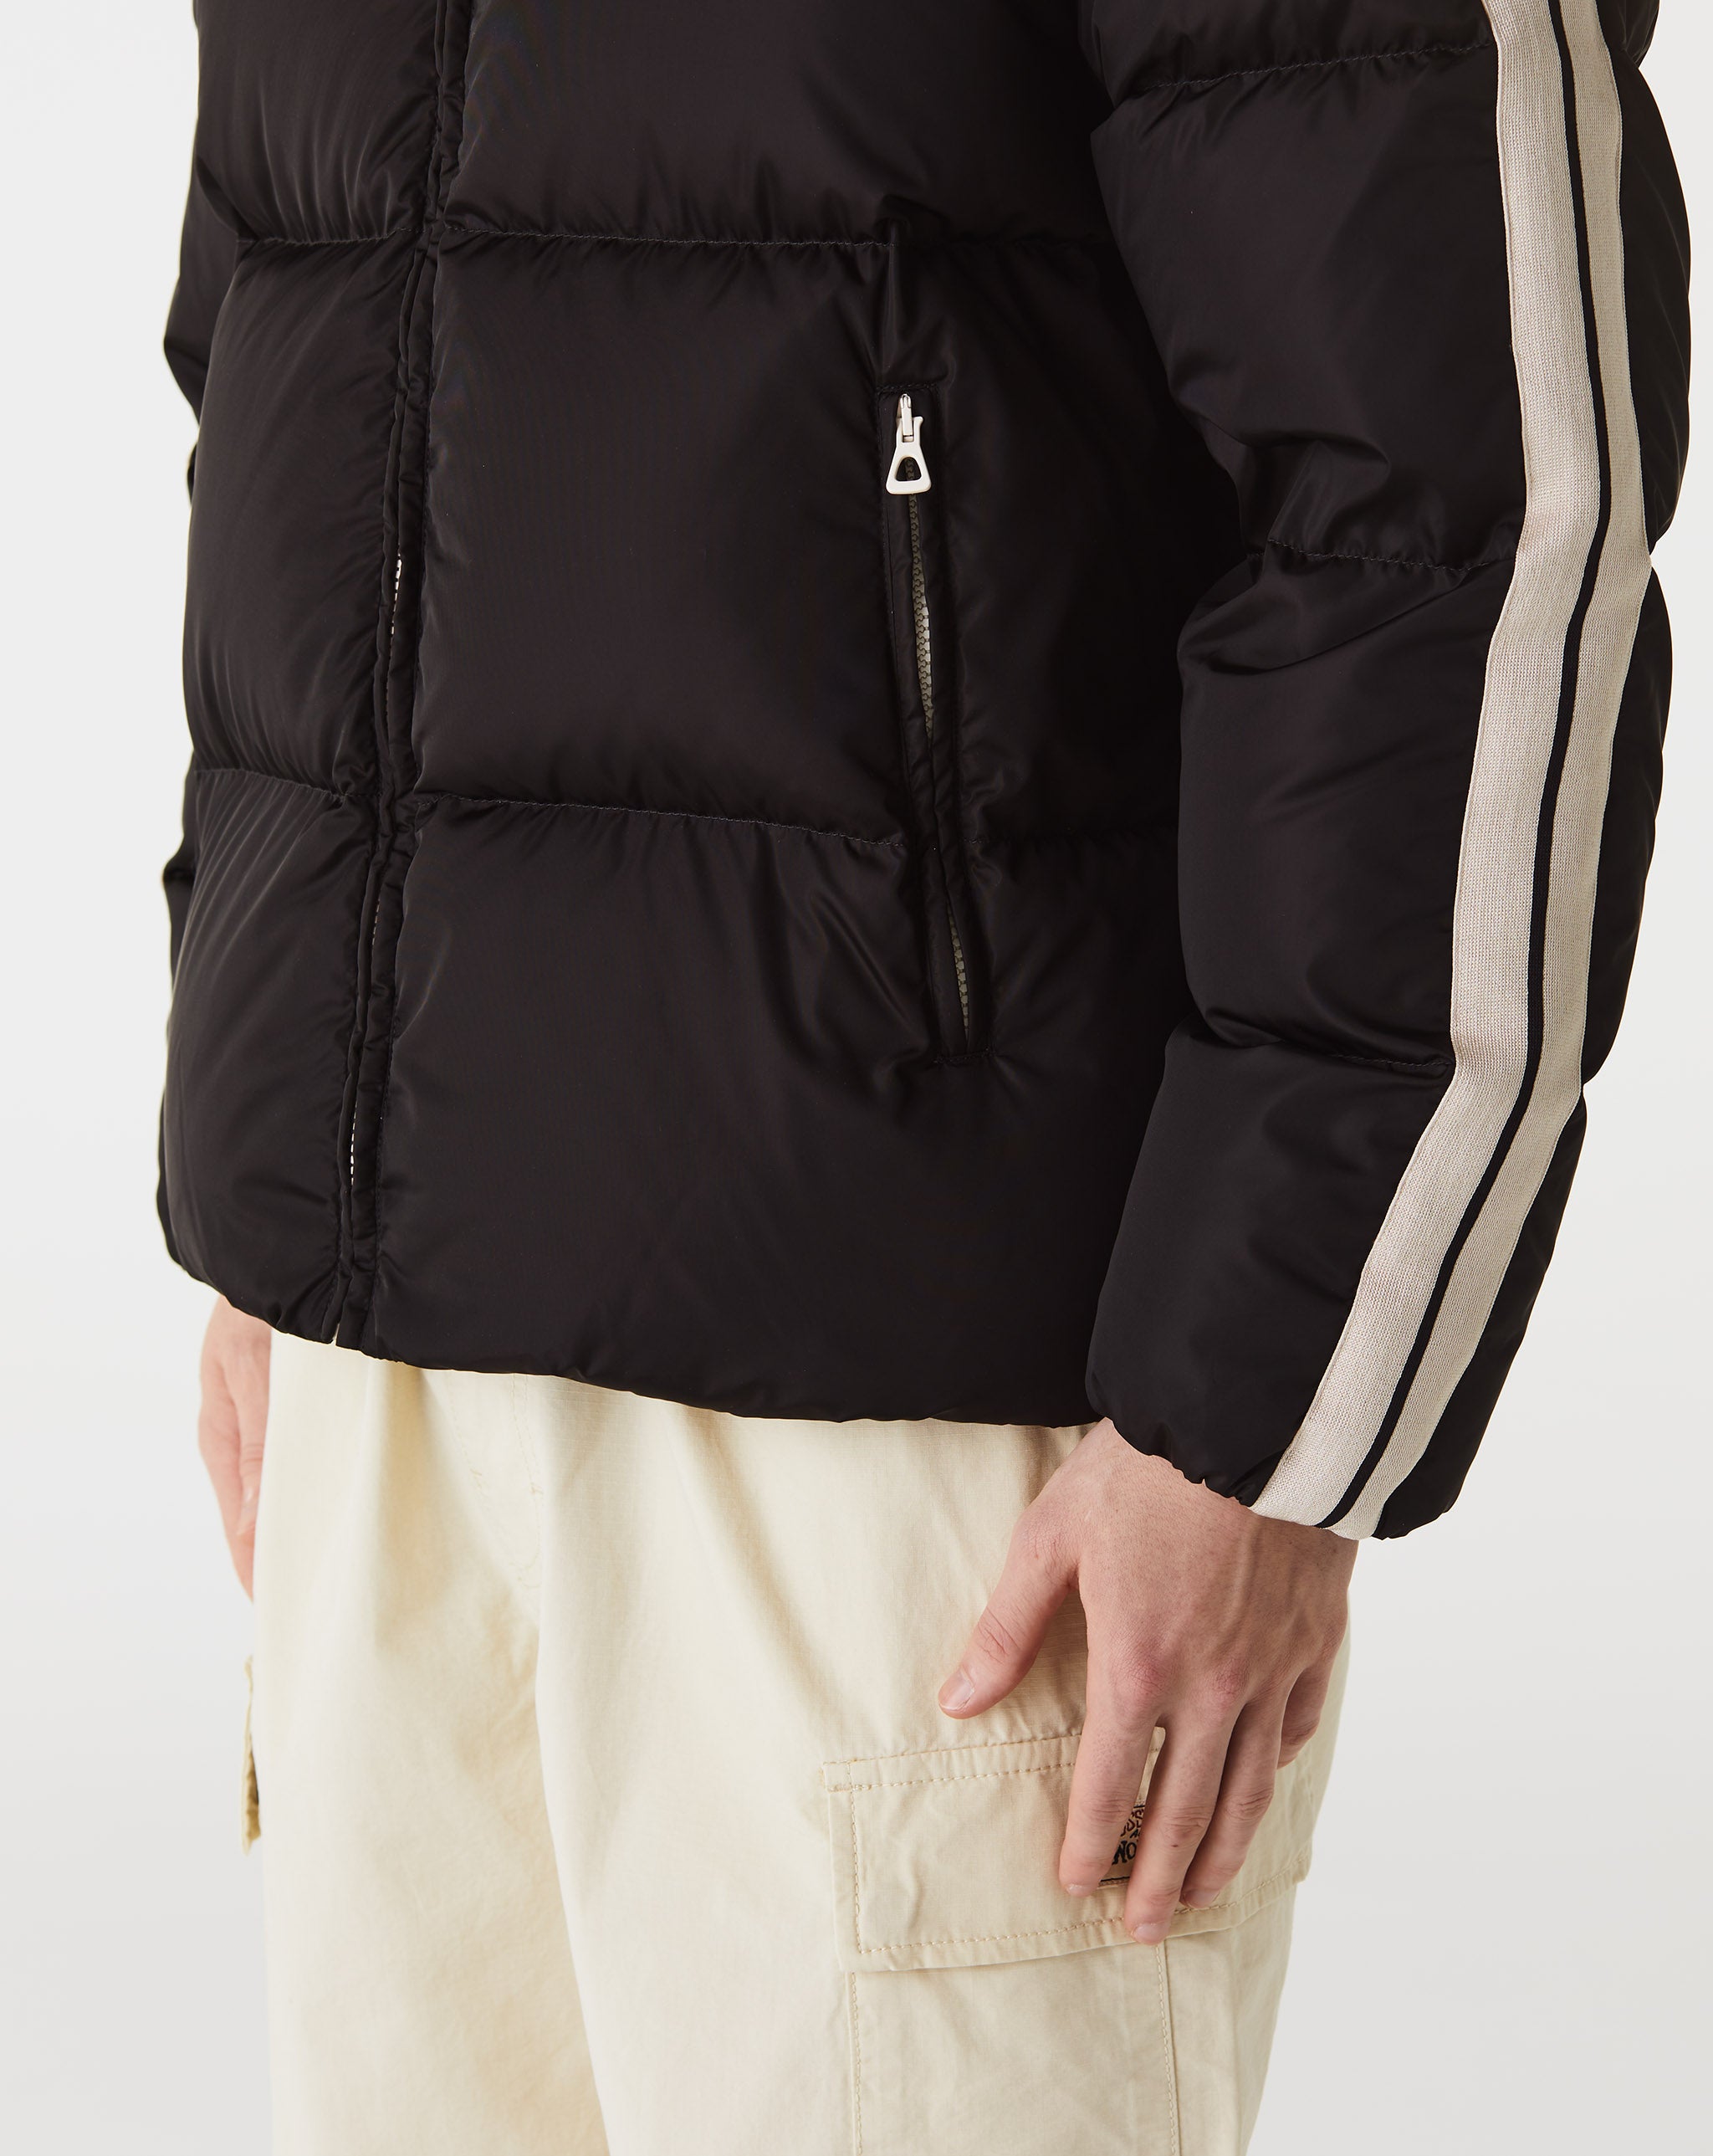 Palm Angels Hooded Track Jacket  - XHIBITION